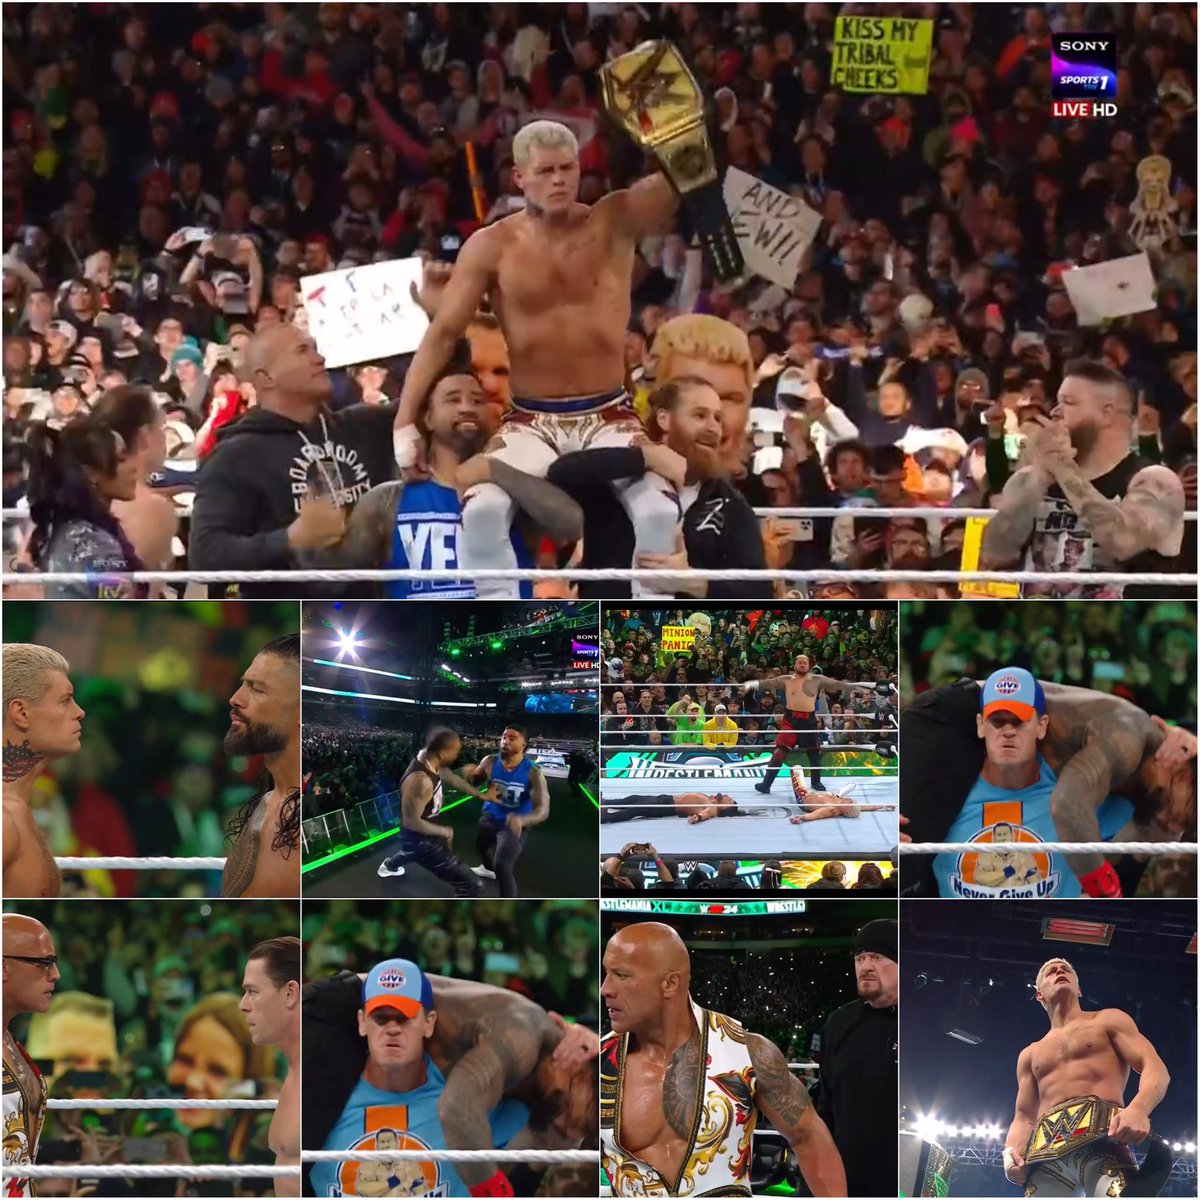 That was just awesome #WrestleMania40 #WrestleMania